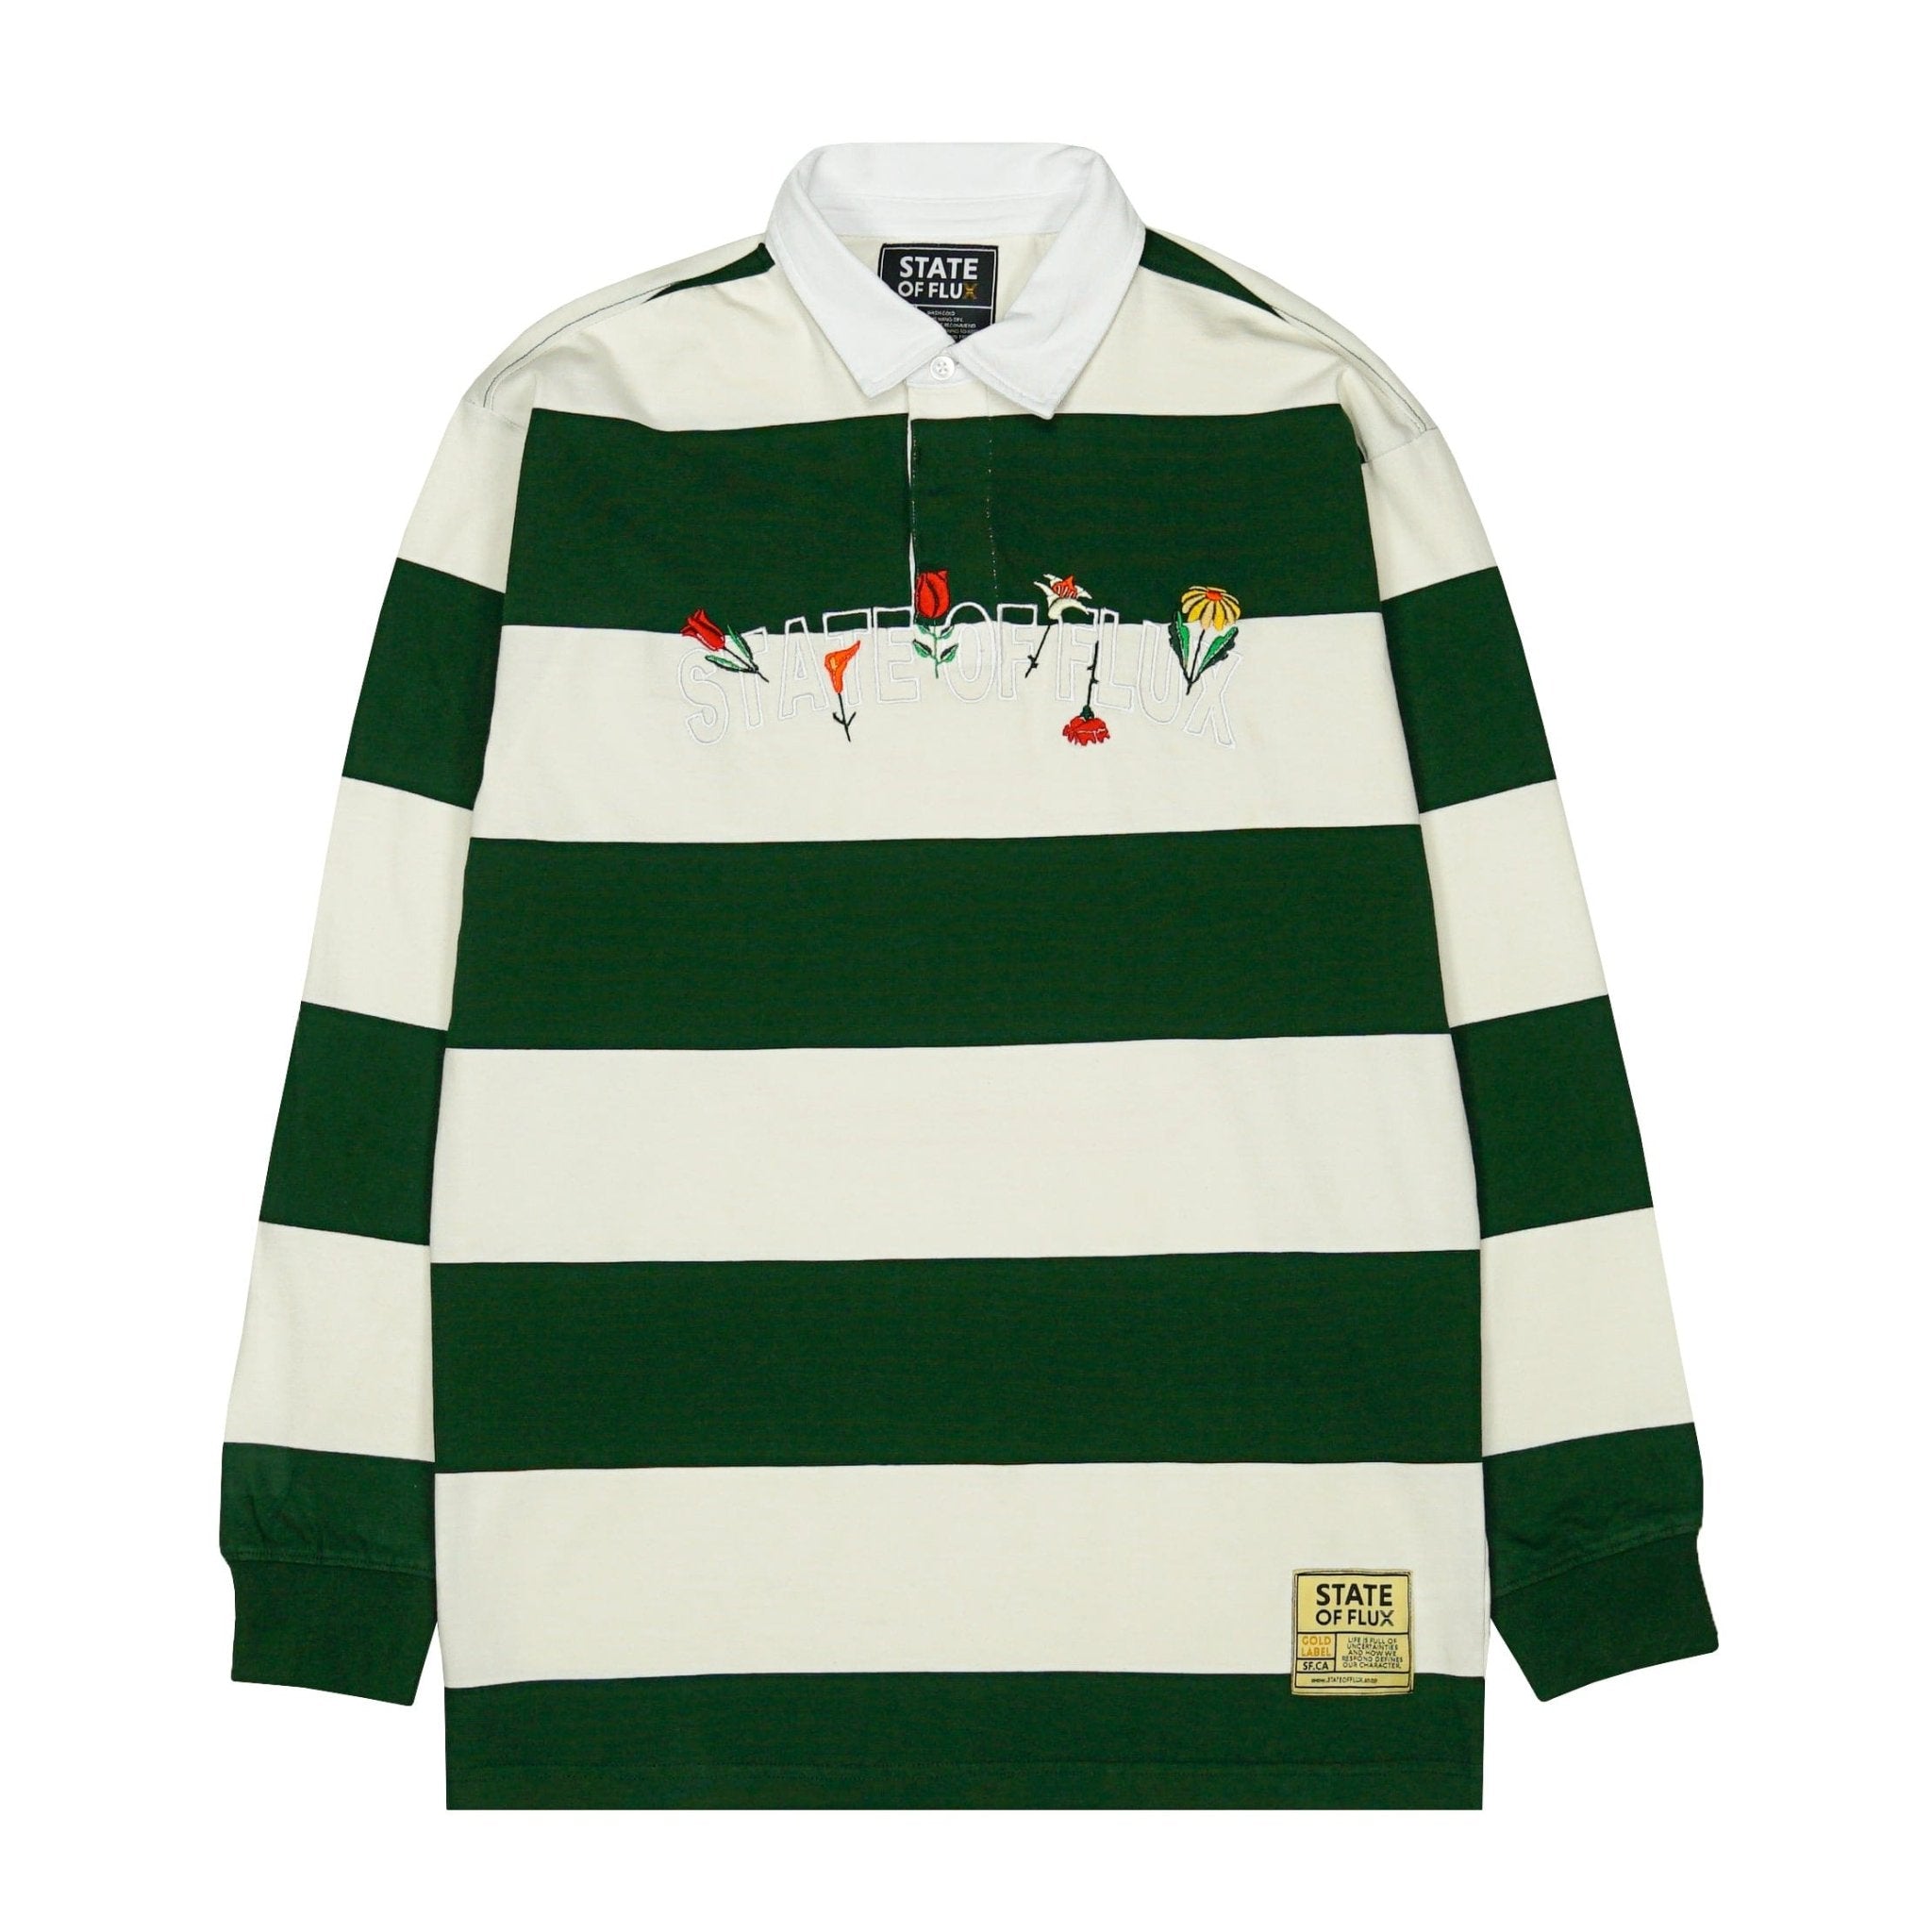 SOF Bloom Striped Rugby Polo in natural and forest green